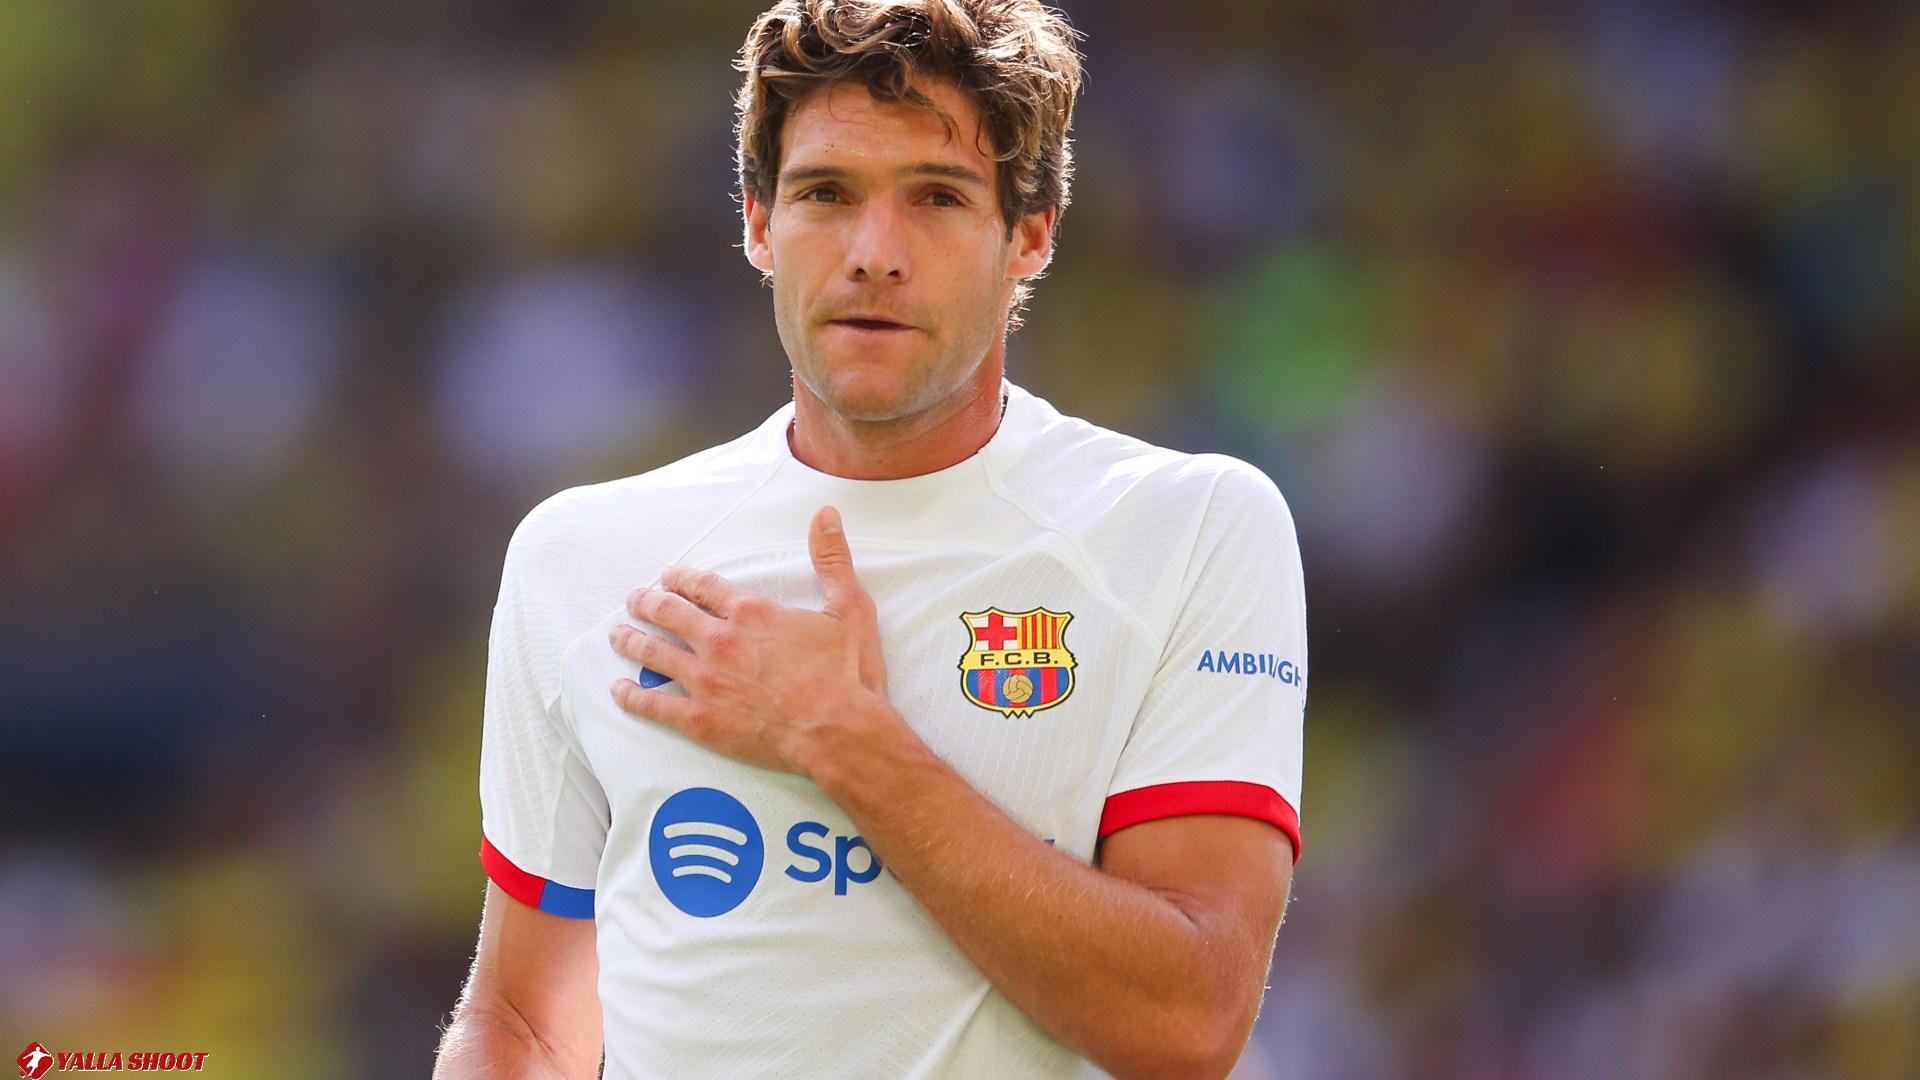 Ex-Chelsea star Marcos Alonso set to quit Barcelona after just two frustrating years and could return to Premier League